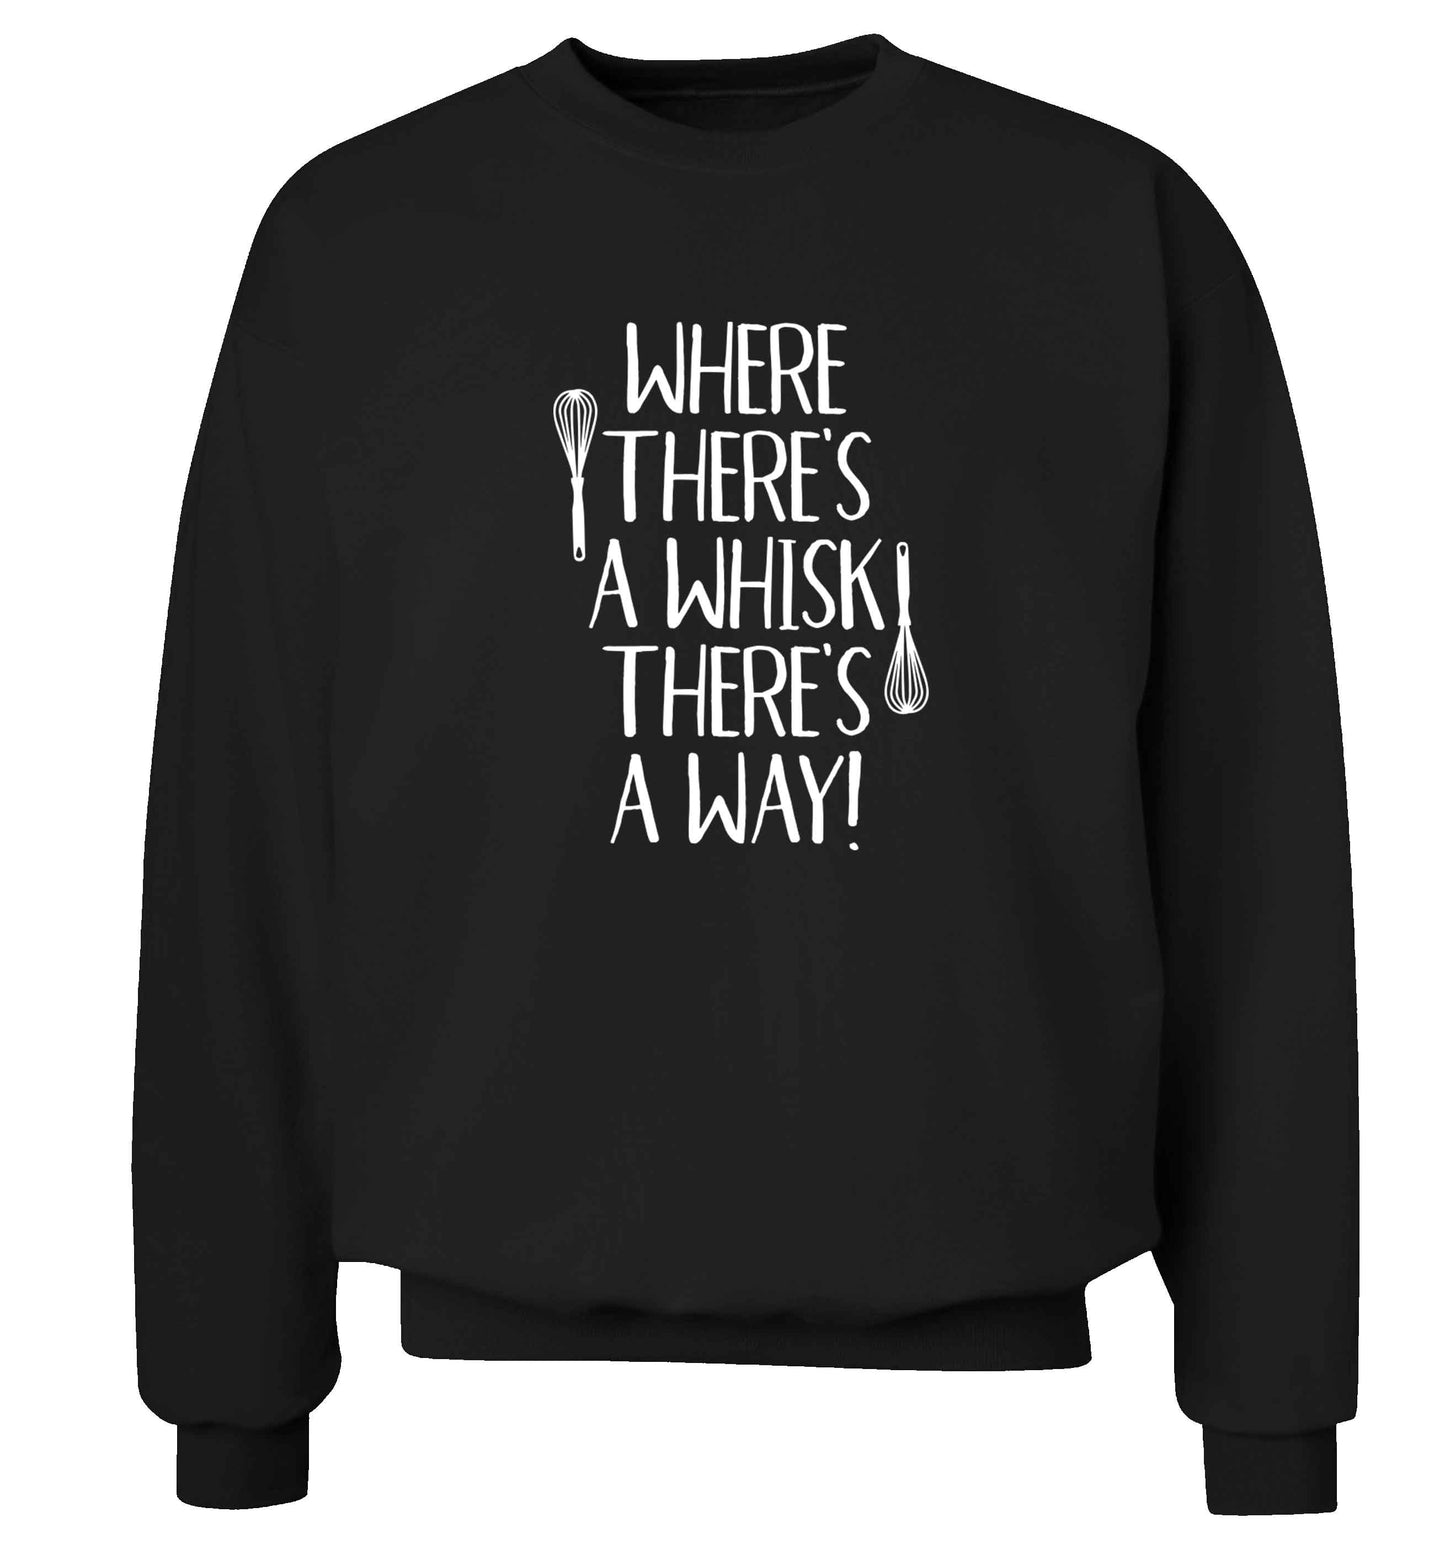 Where there's a whisk there's a way Adult's unisex black Sweater 2XL